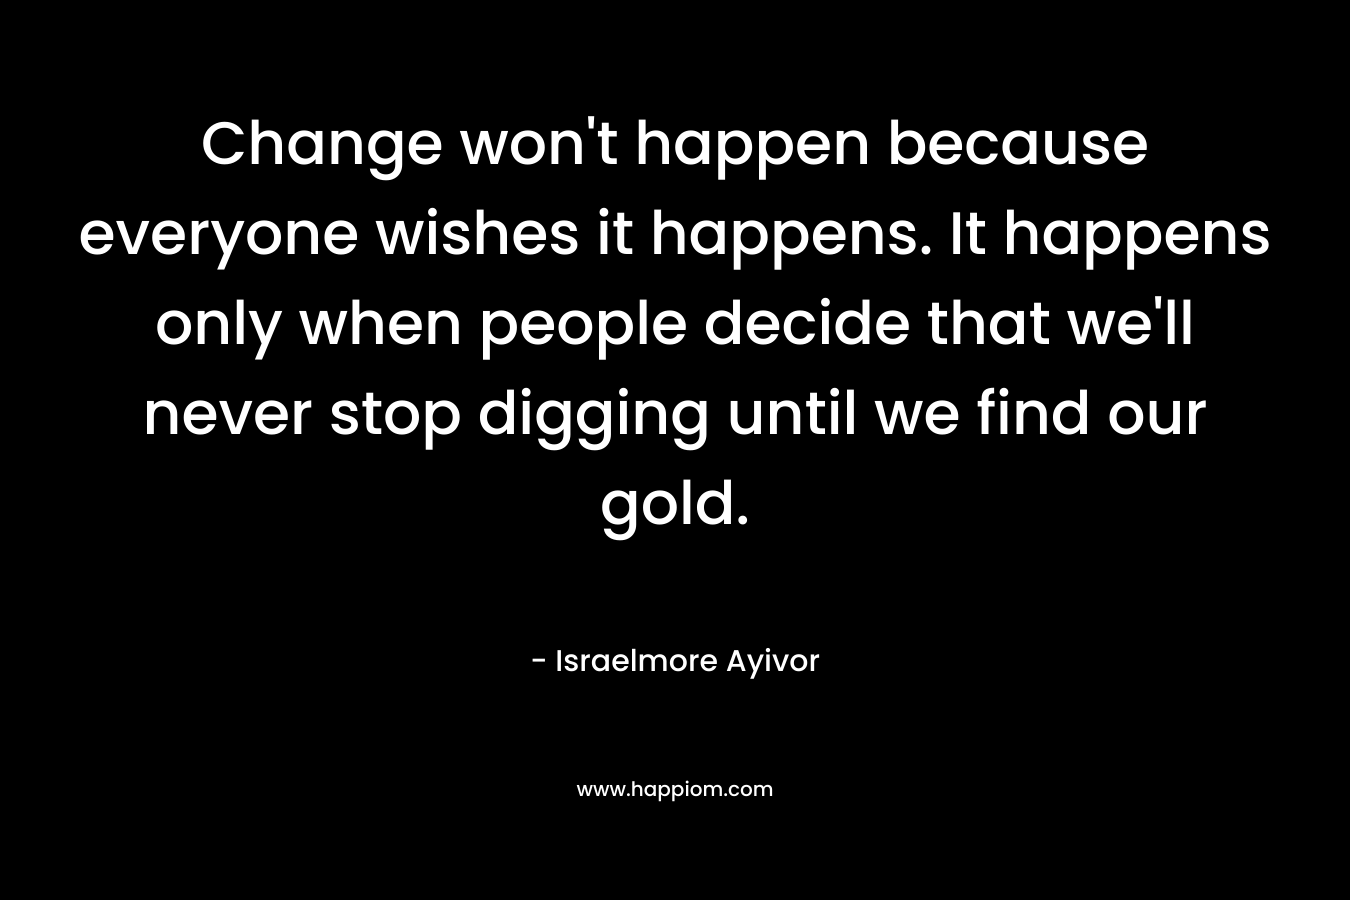 Change won't happen because everyone wishes it happens. It happens only when people decide that we'll never stop digging until we find our gold.